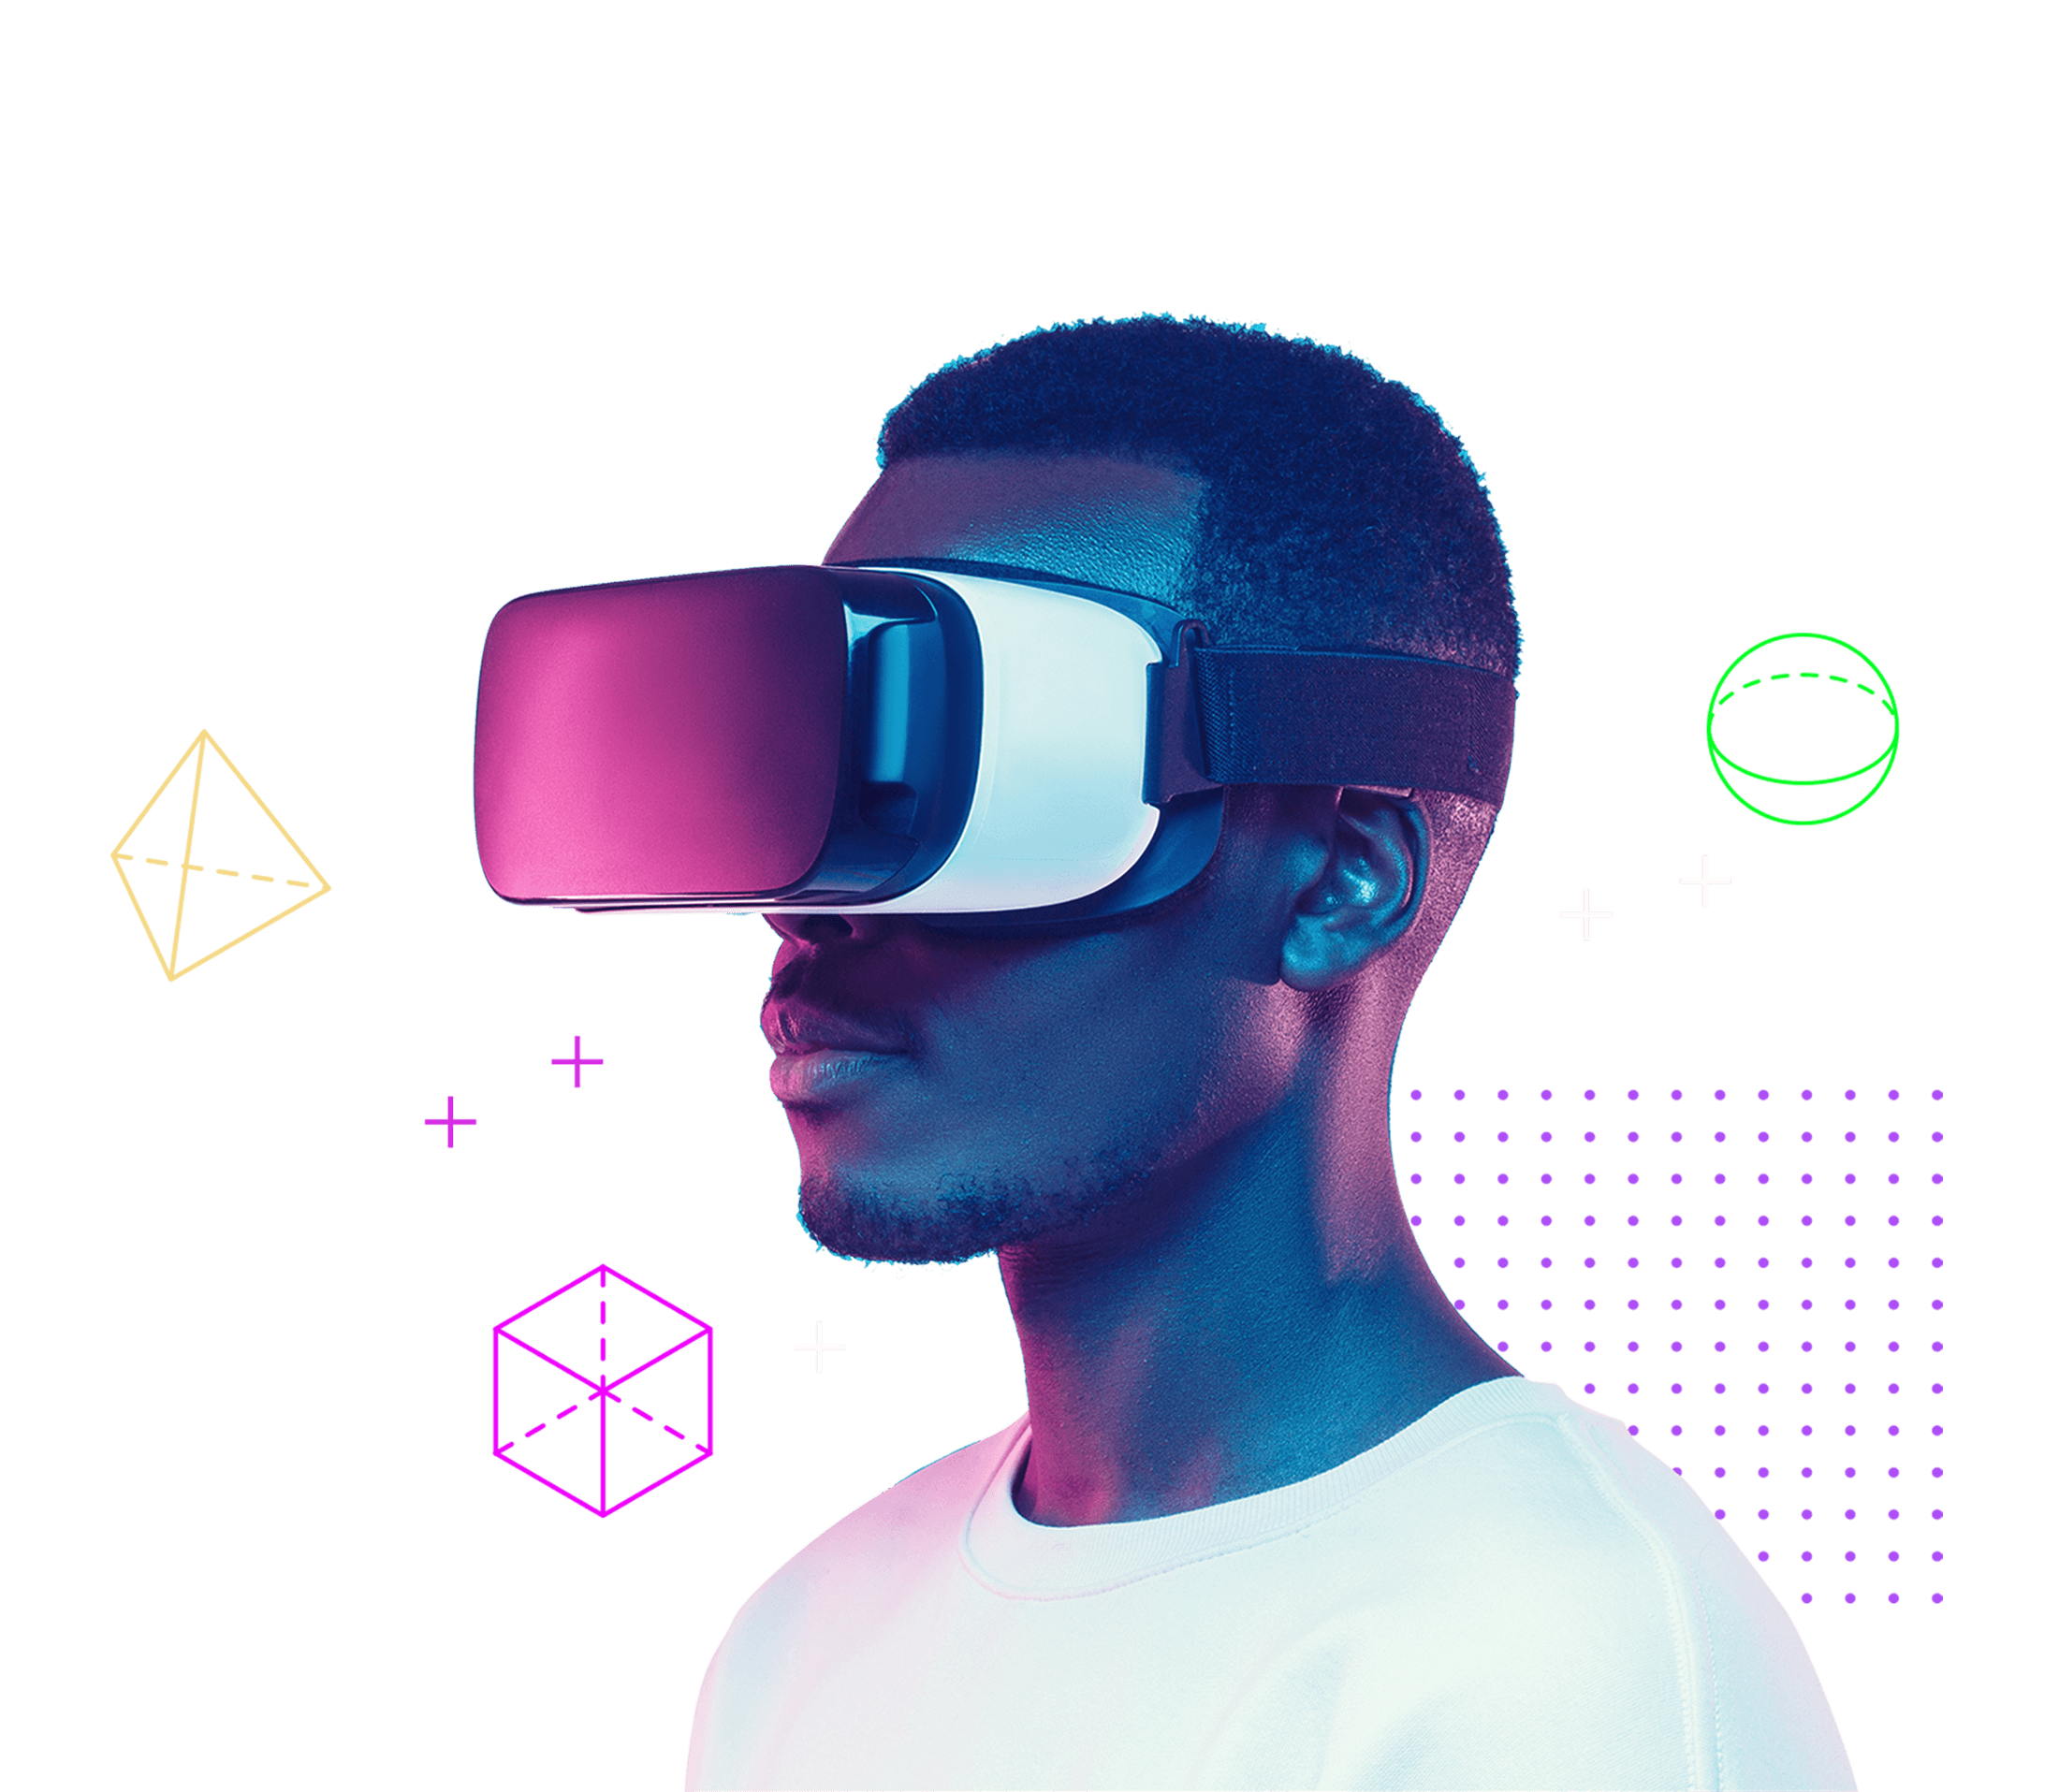 vr and ar designs for 3d experiences